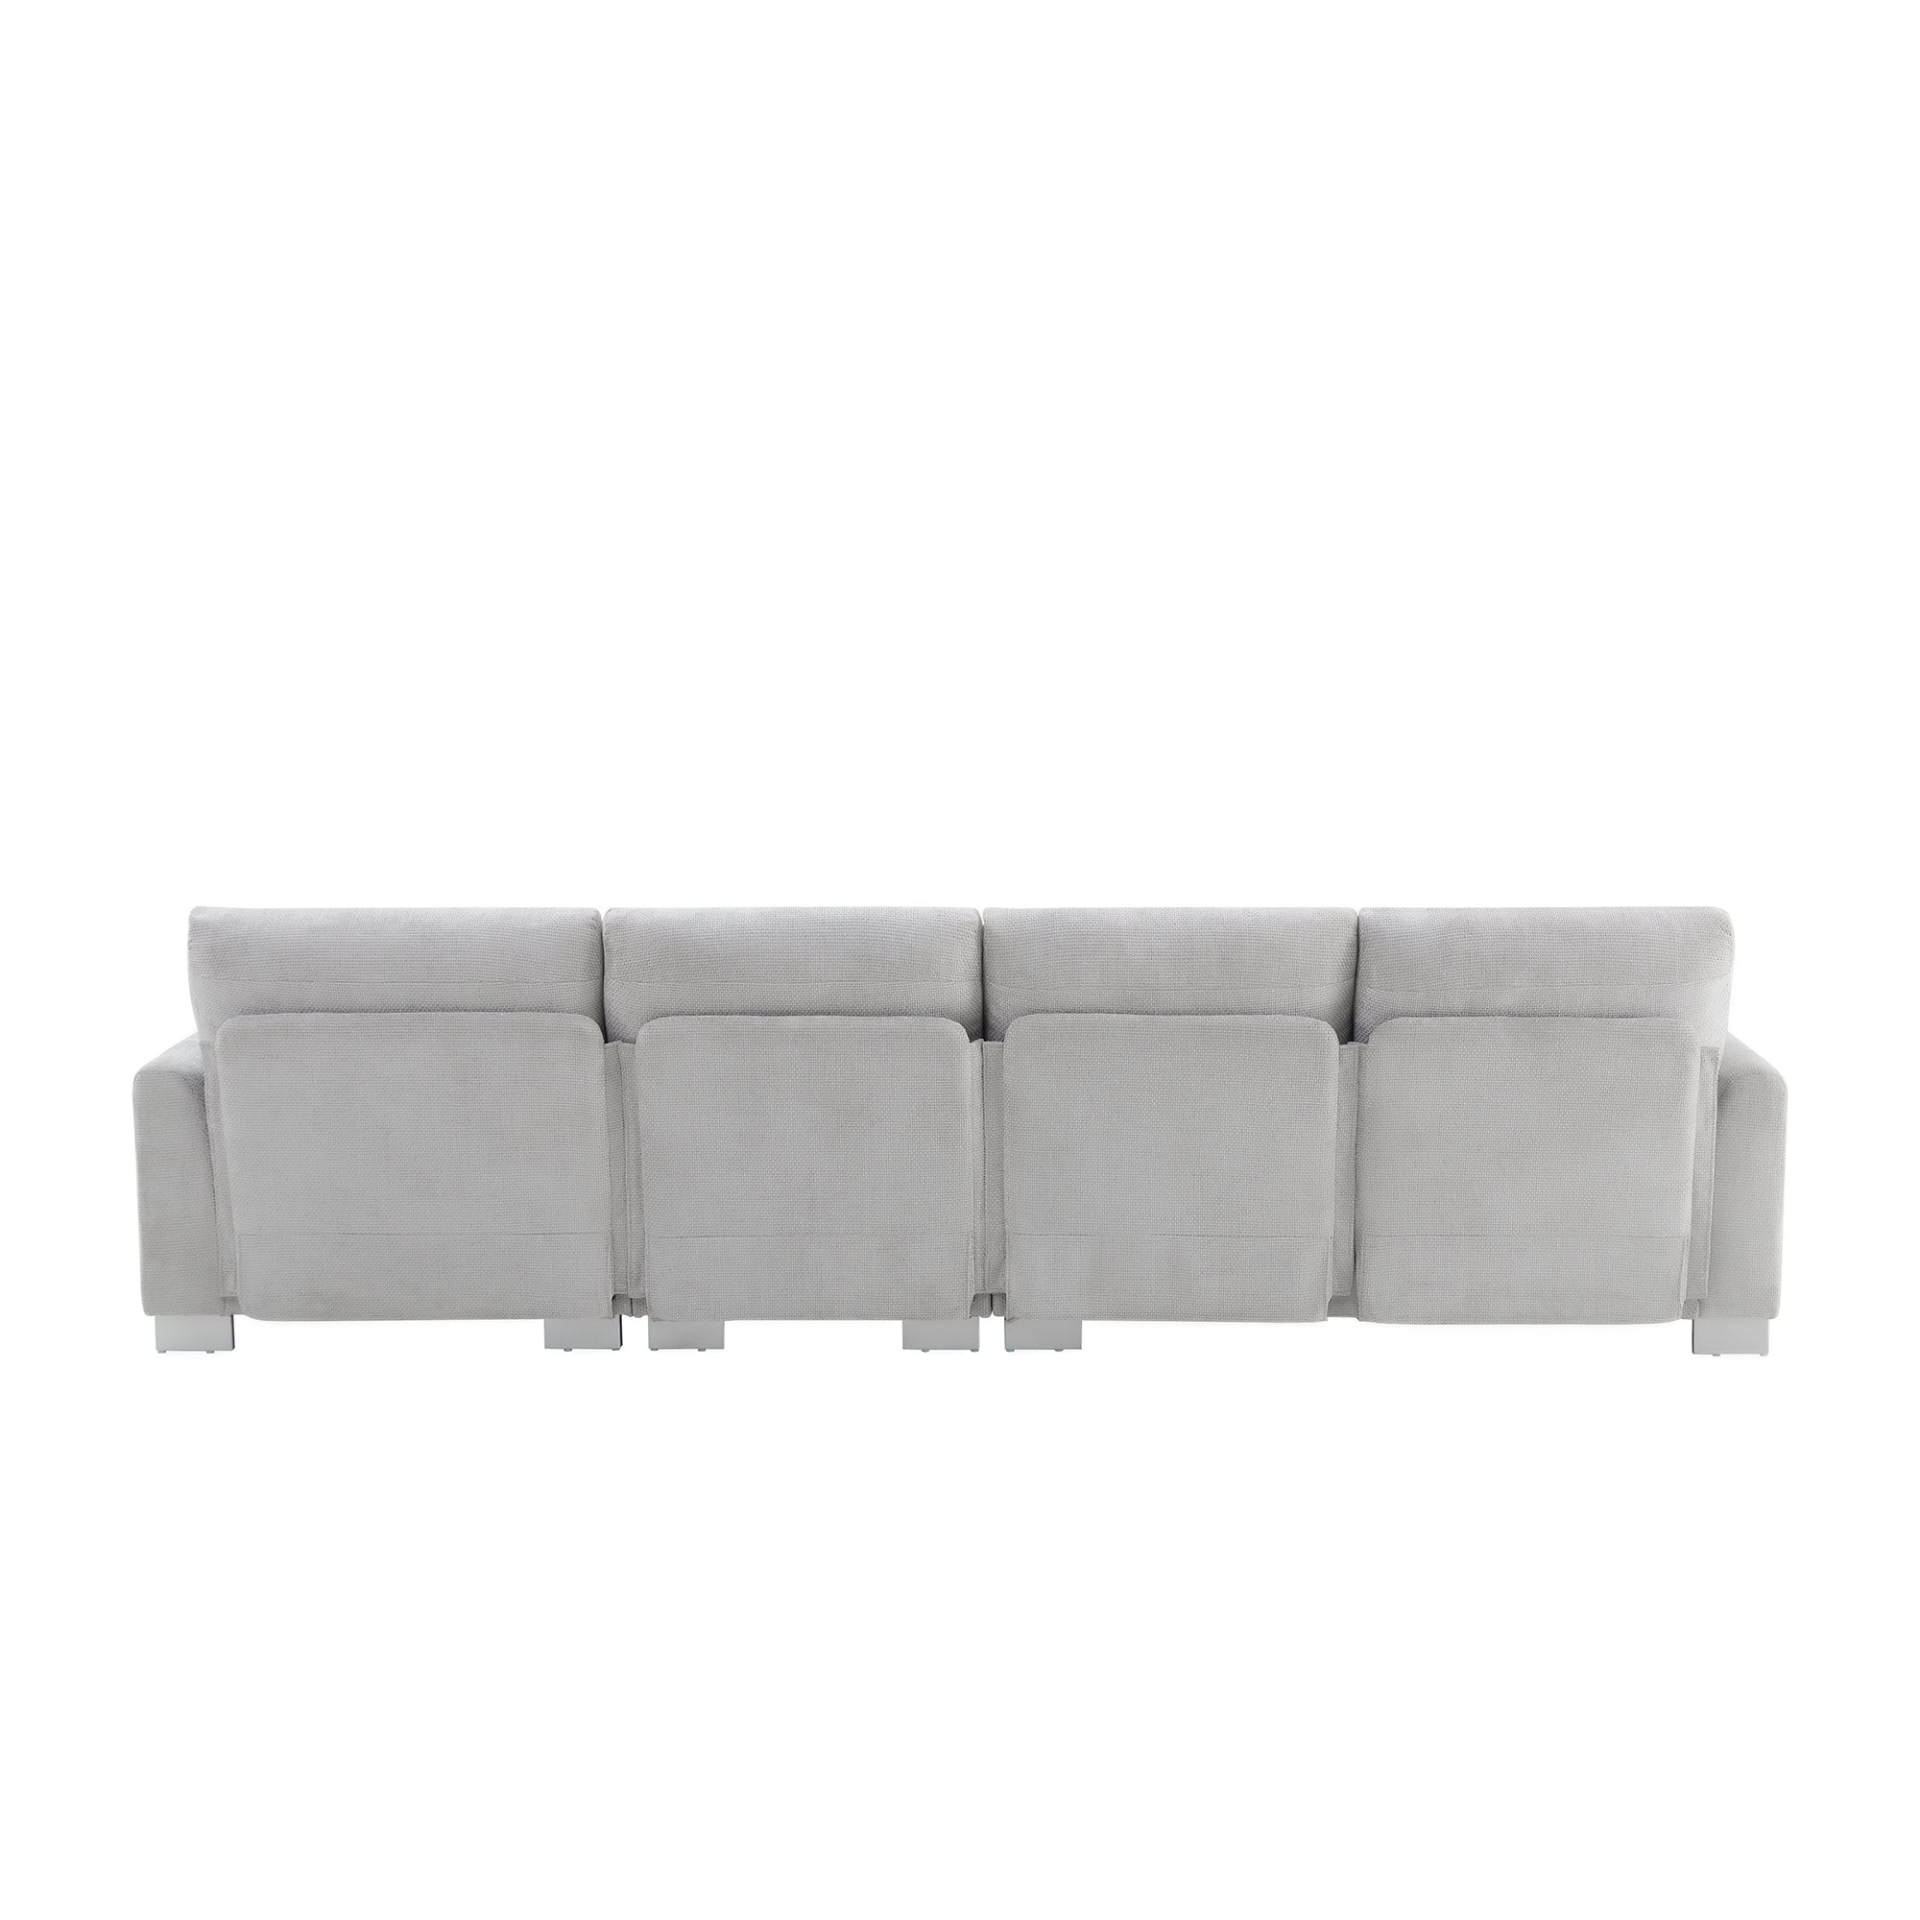 119*55" Modern Oversized Sectional Sofa,L-shaped Luxury Couch Set with 2 Free pillows,5-seat Chenille Indoor Furniture with Chaise for Living Room,Apartment,Office,2 Colors